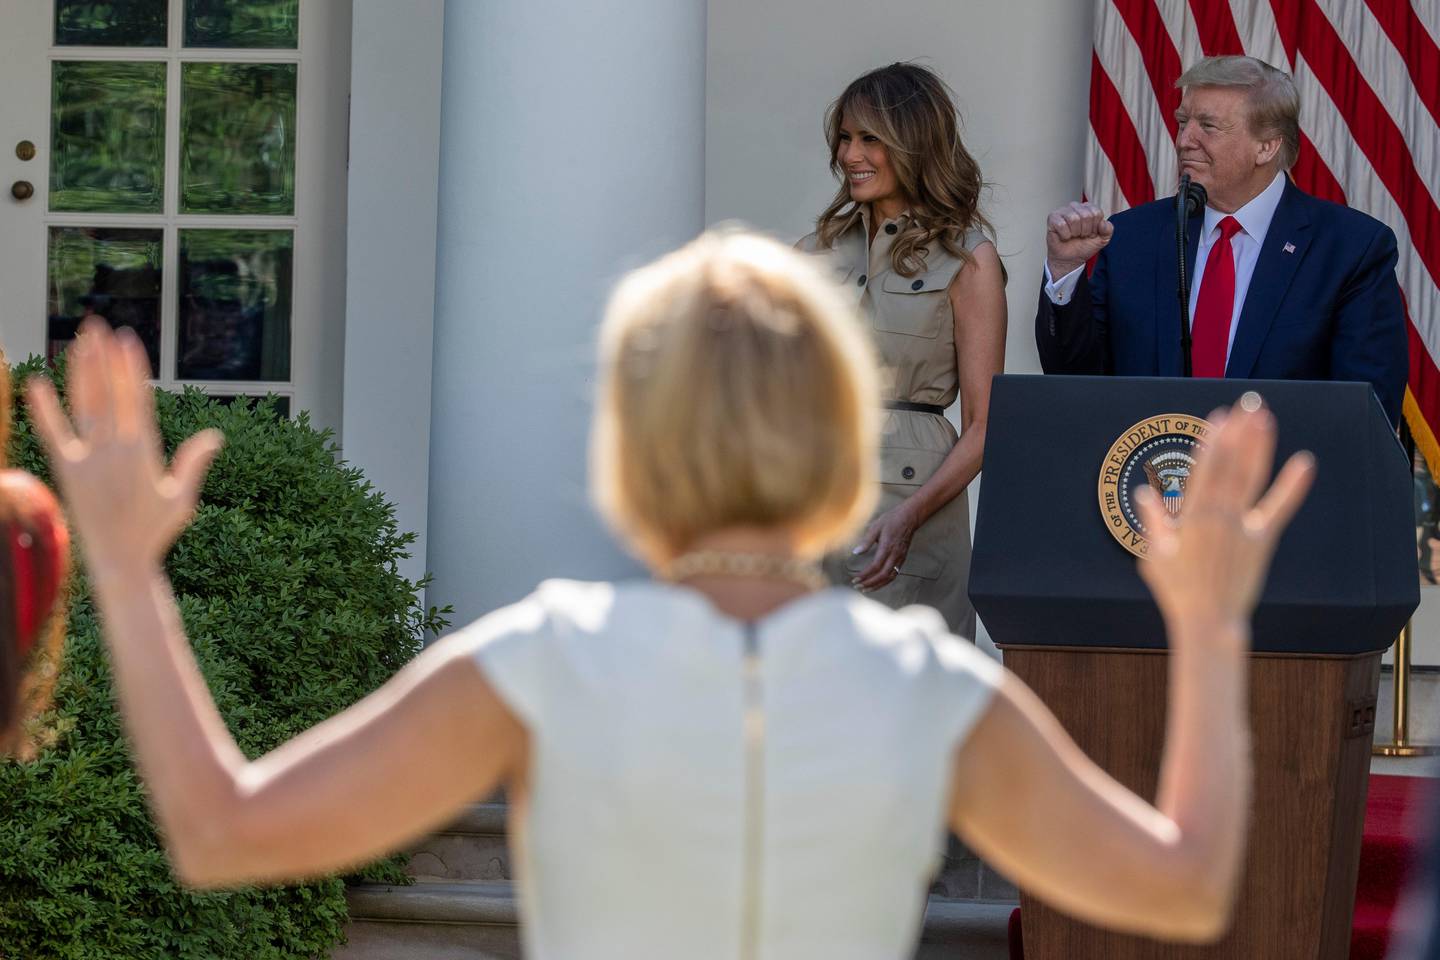 President Donald Trump stands with first lady Melania Trump as White House spiritual adviser Paula White, left foreground, raises her hands in praise during a White House National Day of Prayer Service in the Rose Garden of the White House, Thursday, May 7, 2020, in Washington. (AP Photo/Alex Brandon)